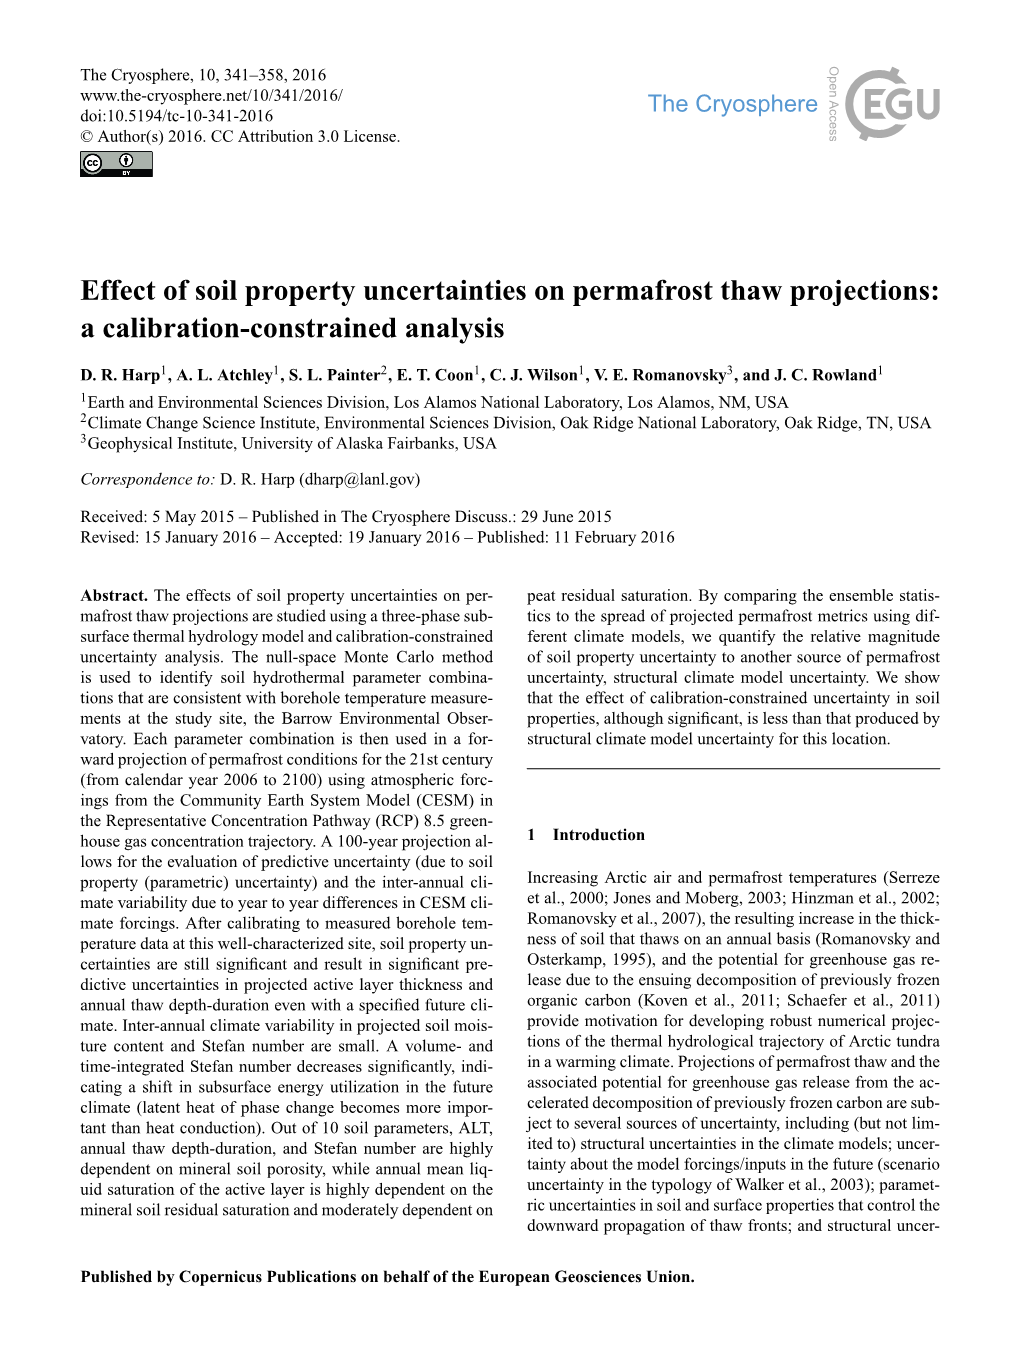 Effect of Soil Property Uncertainties on Permafrost Thaw Projections: a Calibration-Constrained Analysis